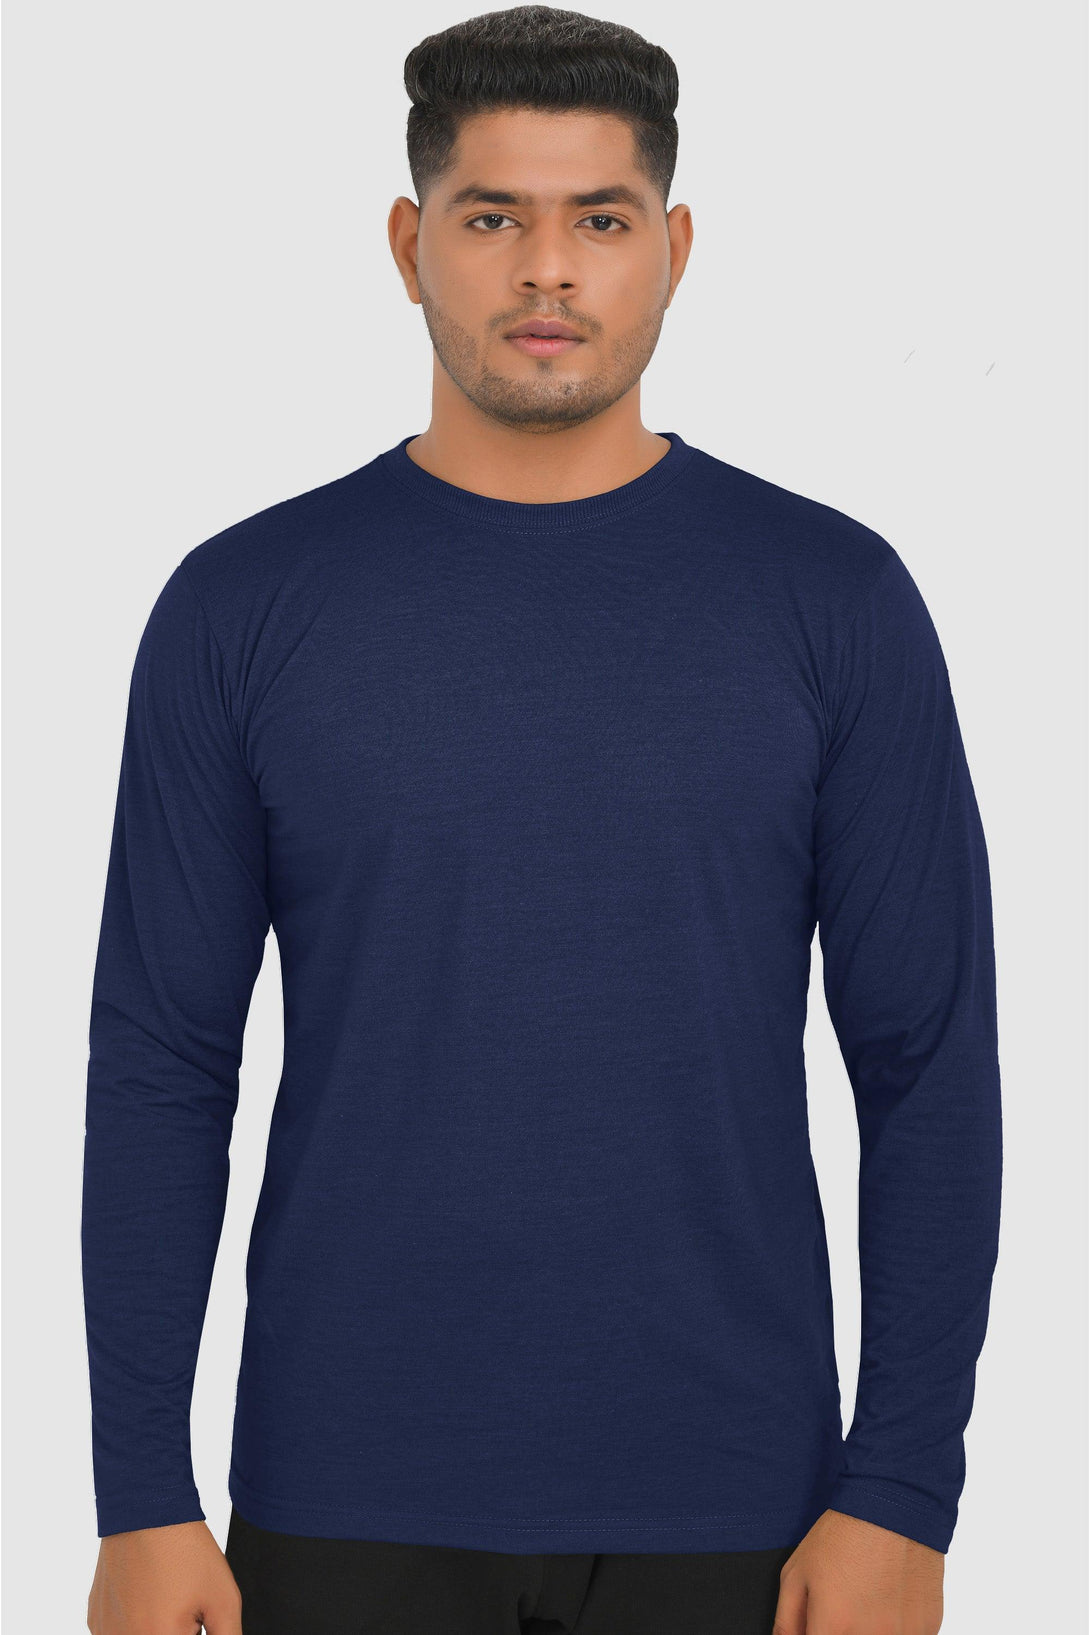 Long Sleeve Round Neck T-Shirts | NAVY - WHITE - CHARCOAL - BLACK - FTS